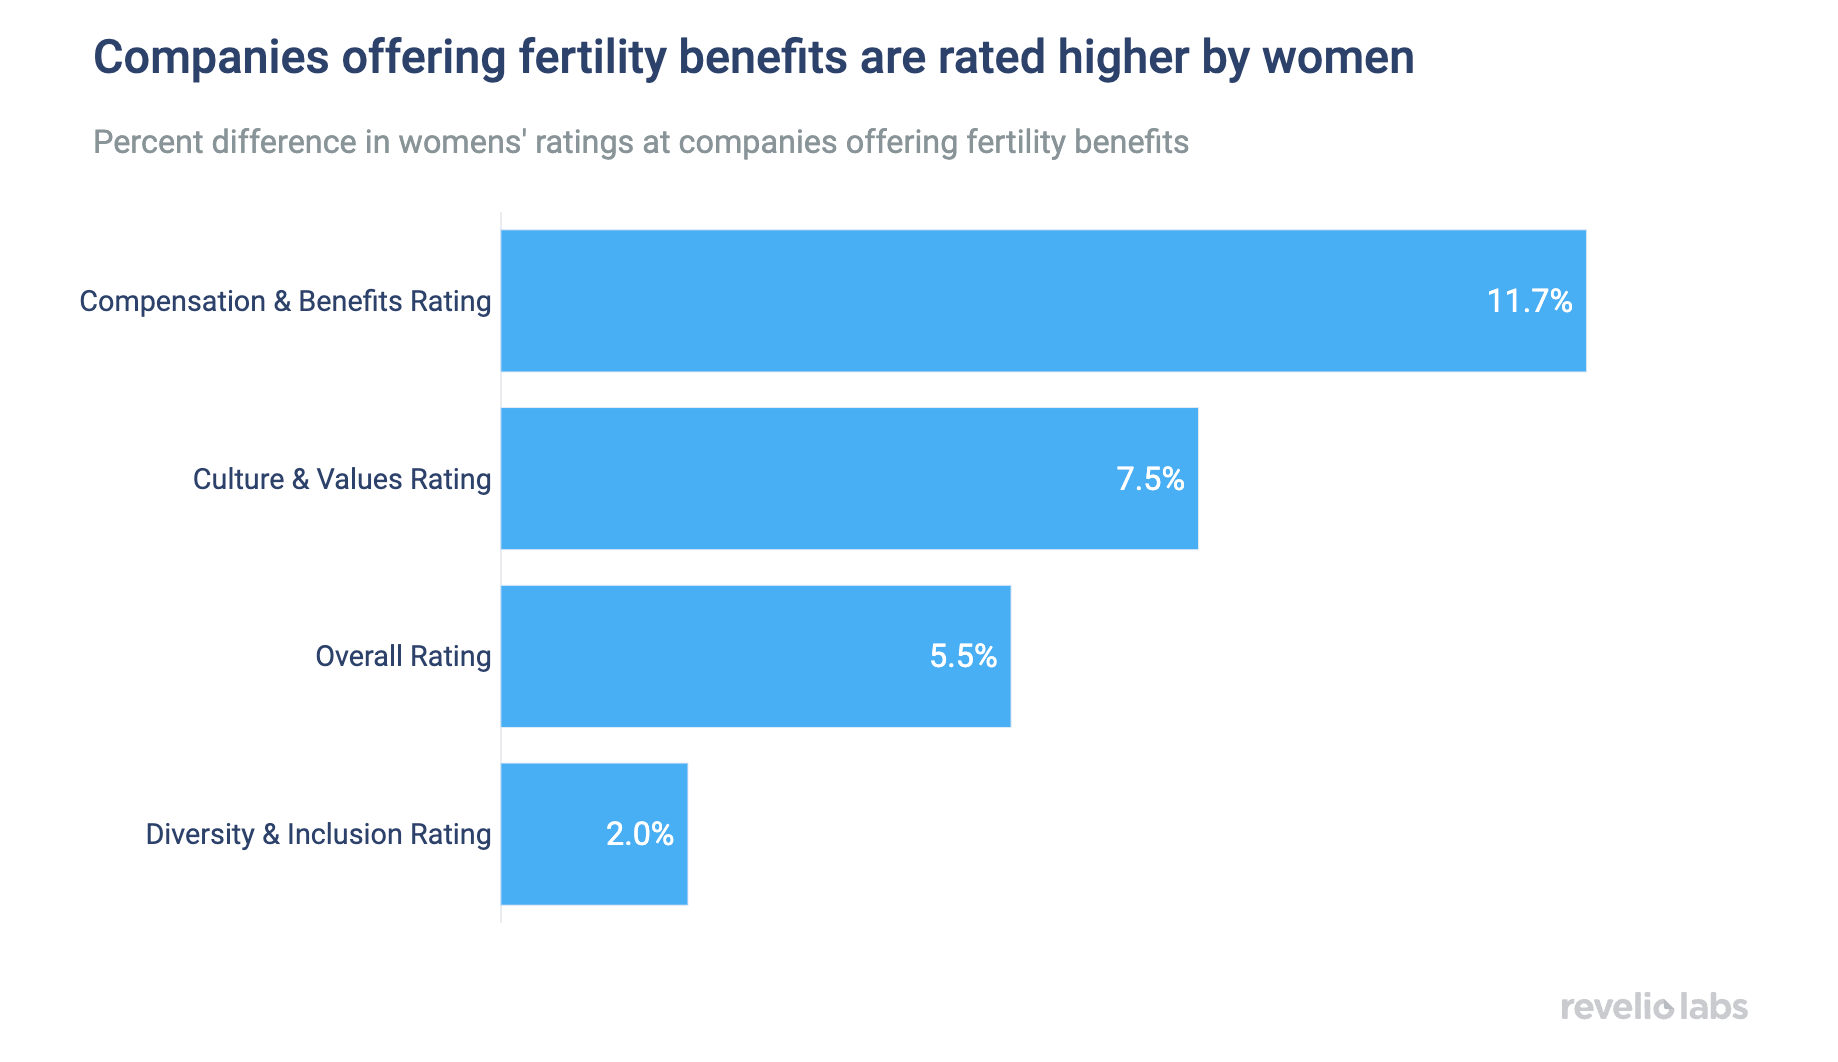 Companies offering fertility benefits are rated higher by women